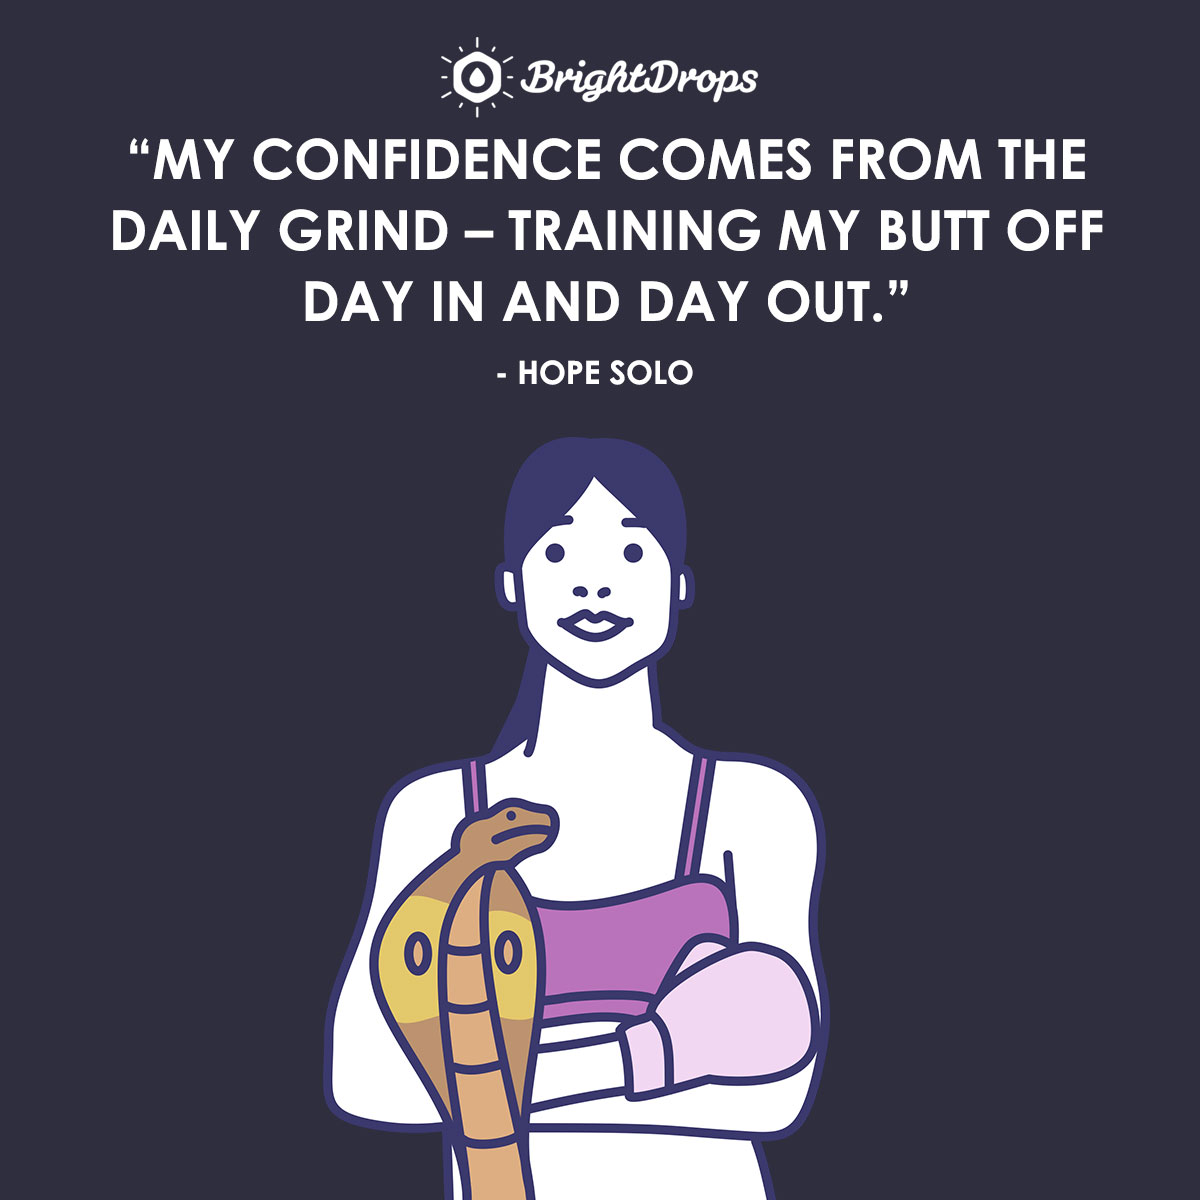 My confidence comes from the daily grind - training my butt off day in and day out. - Hope Solo